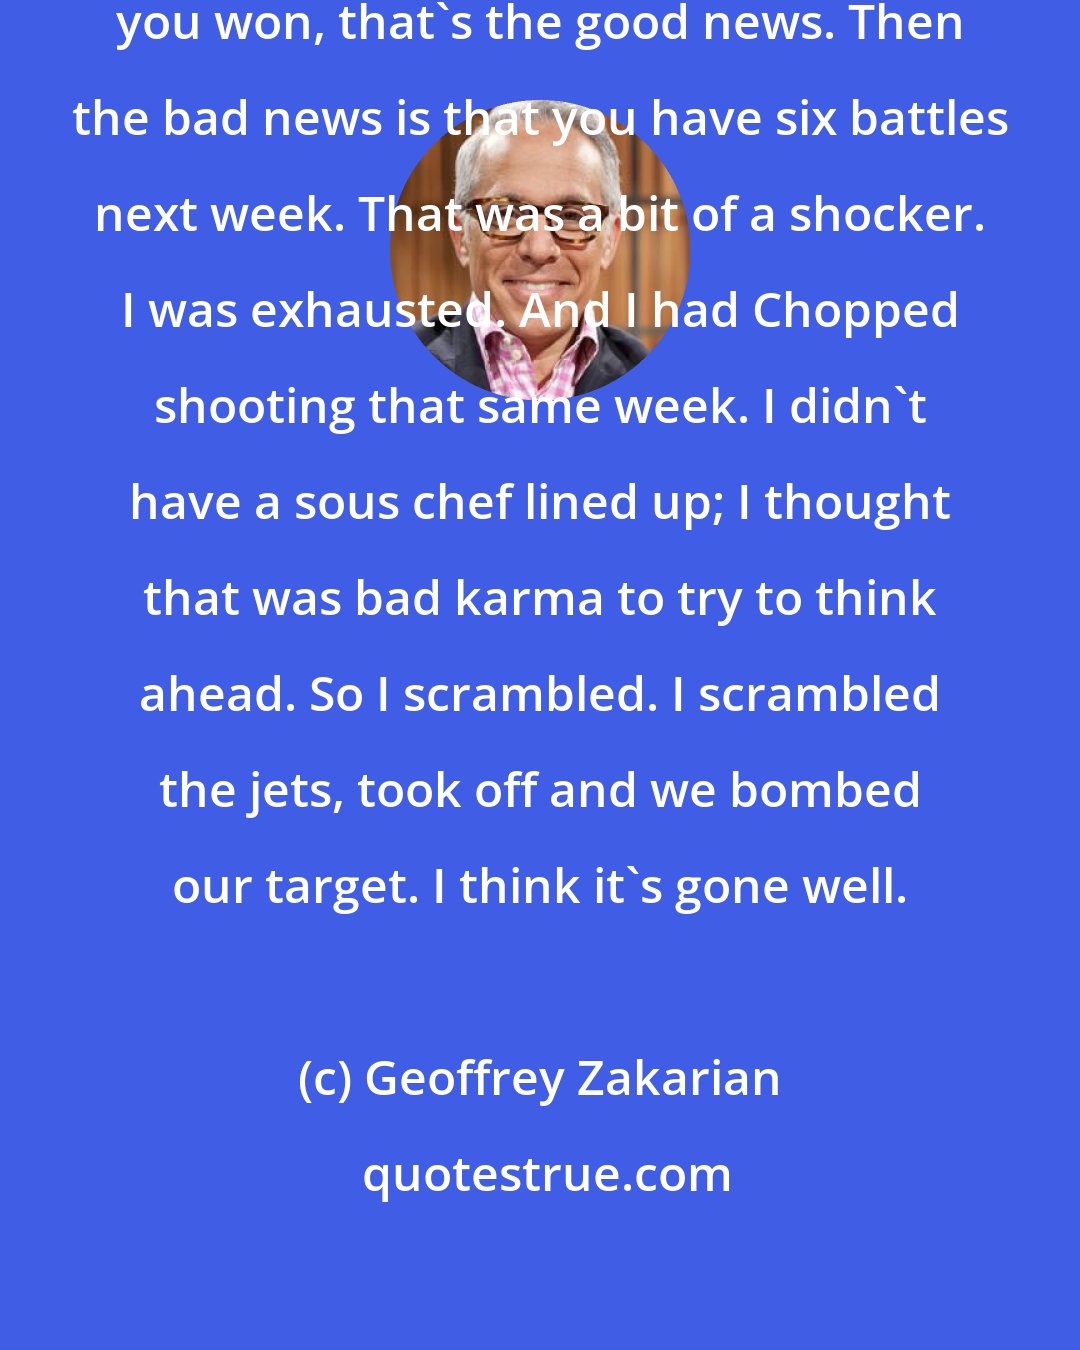 Geoffrey Zakarian: I was shocked when they told me congratulations, you won, that's the good news. Then the bad news is that you have six battles next week. That was a bit of a shocker. I was exhausted. And I had Chopped shooting that same week. I didn't have a sous chef lined up; I thought that was bad karma to try to think ahead. So I scrambled. I scrambled the jets, took off and we bombed our target. I think it's gone well.